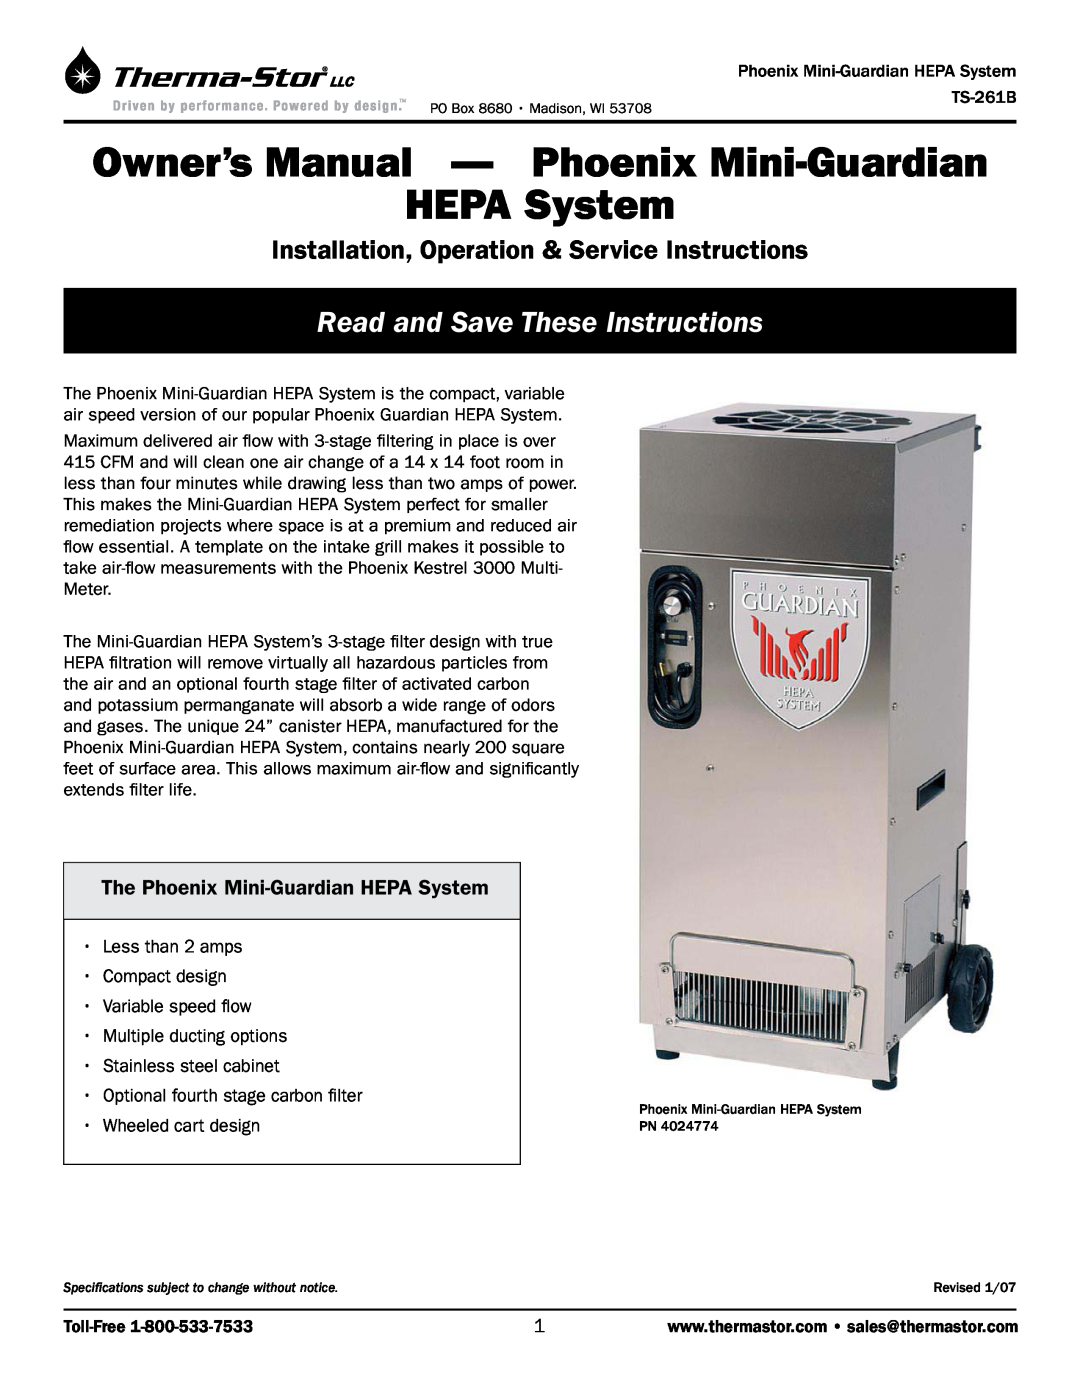 Therma-Stor Products Group TS-261B owner manual The Phoenix Mini-GuardianHEPA System, Read and Save These Instructions 